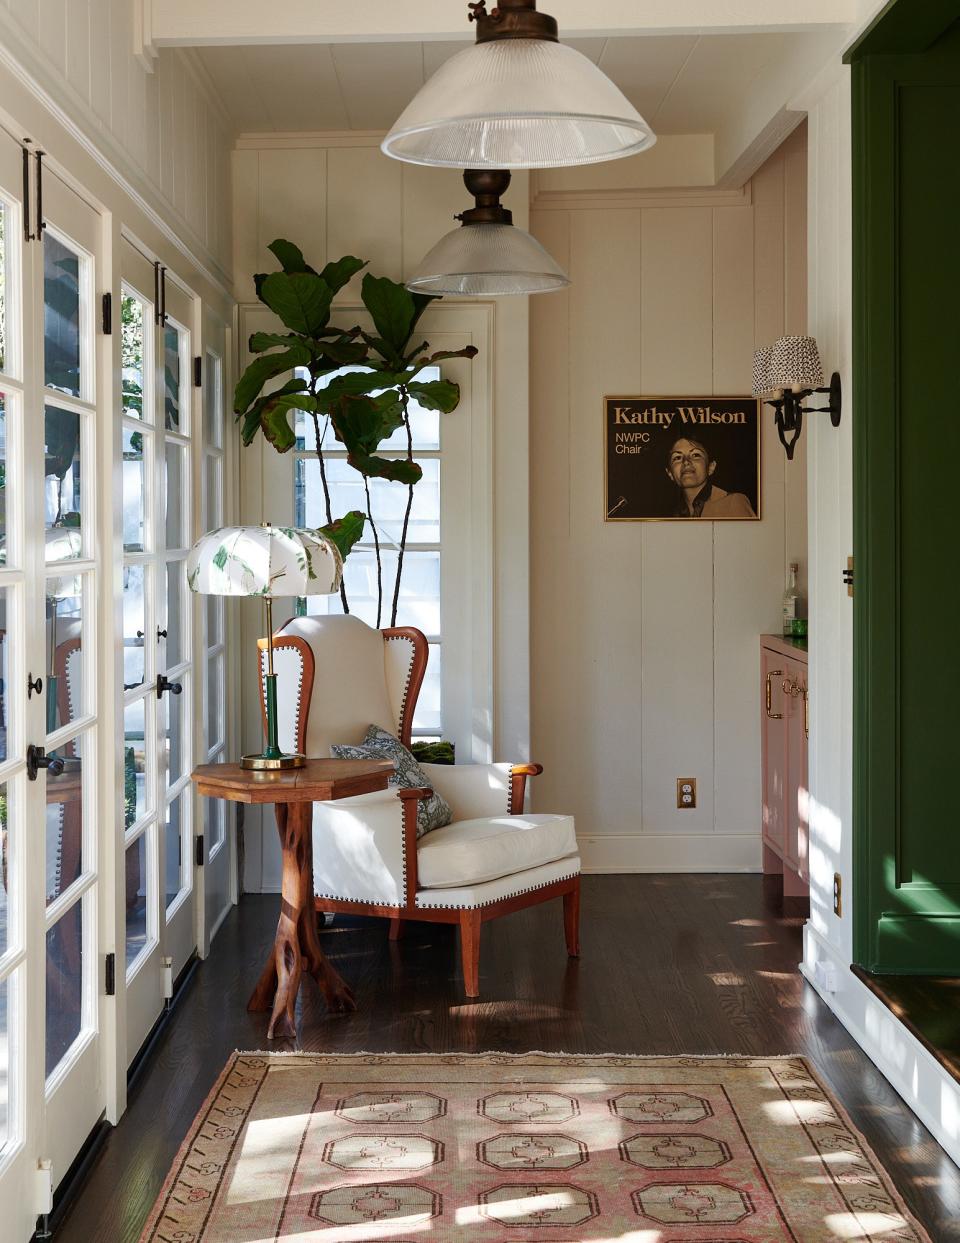 A sunny pass through between the dining room and the verandah was made cozy with the addition of an armchair from Lief and a vintage rug from Jamal’s Rugs. The side table is a vintage piece from Nickey Kehoe and the lamp is Joseph Frank from Lief.